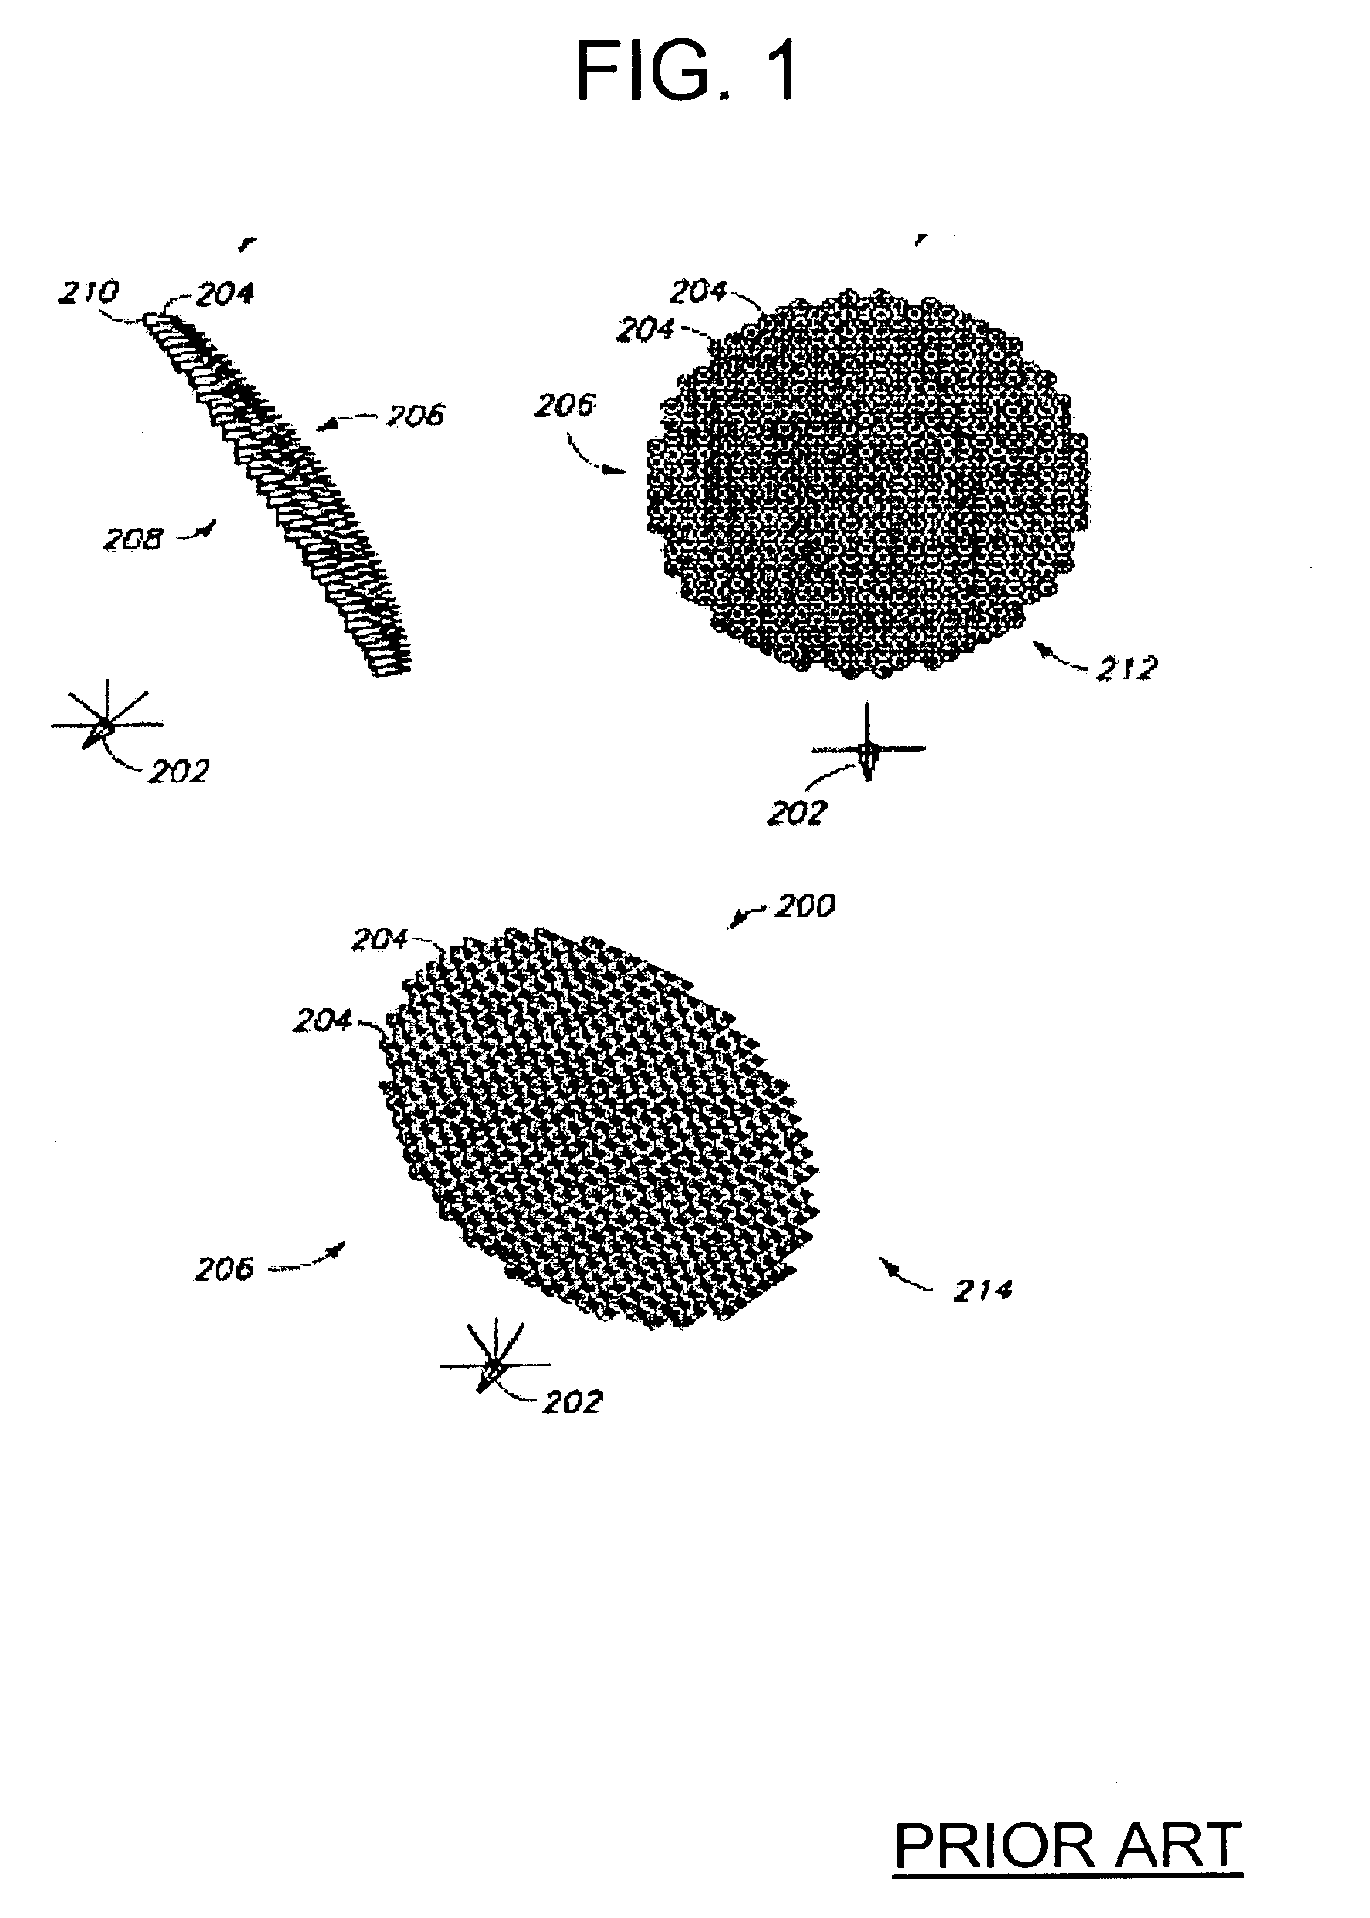 Taper adjustment on reflector and sub-reflector using fluidic dielectrics